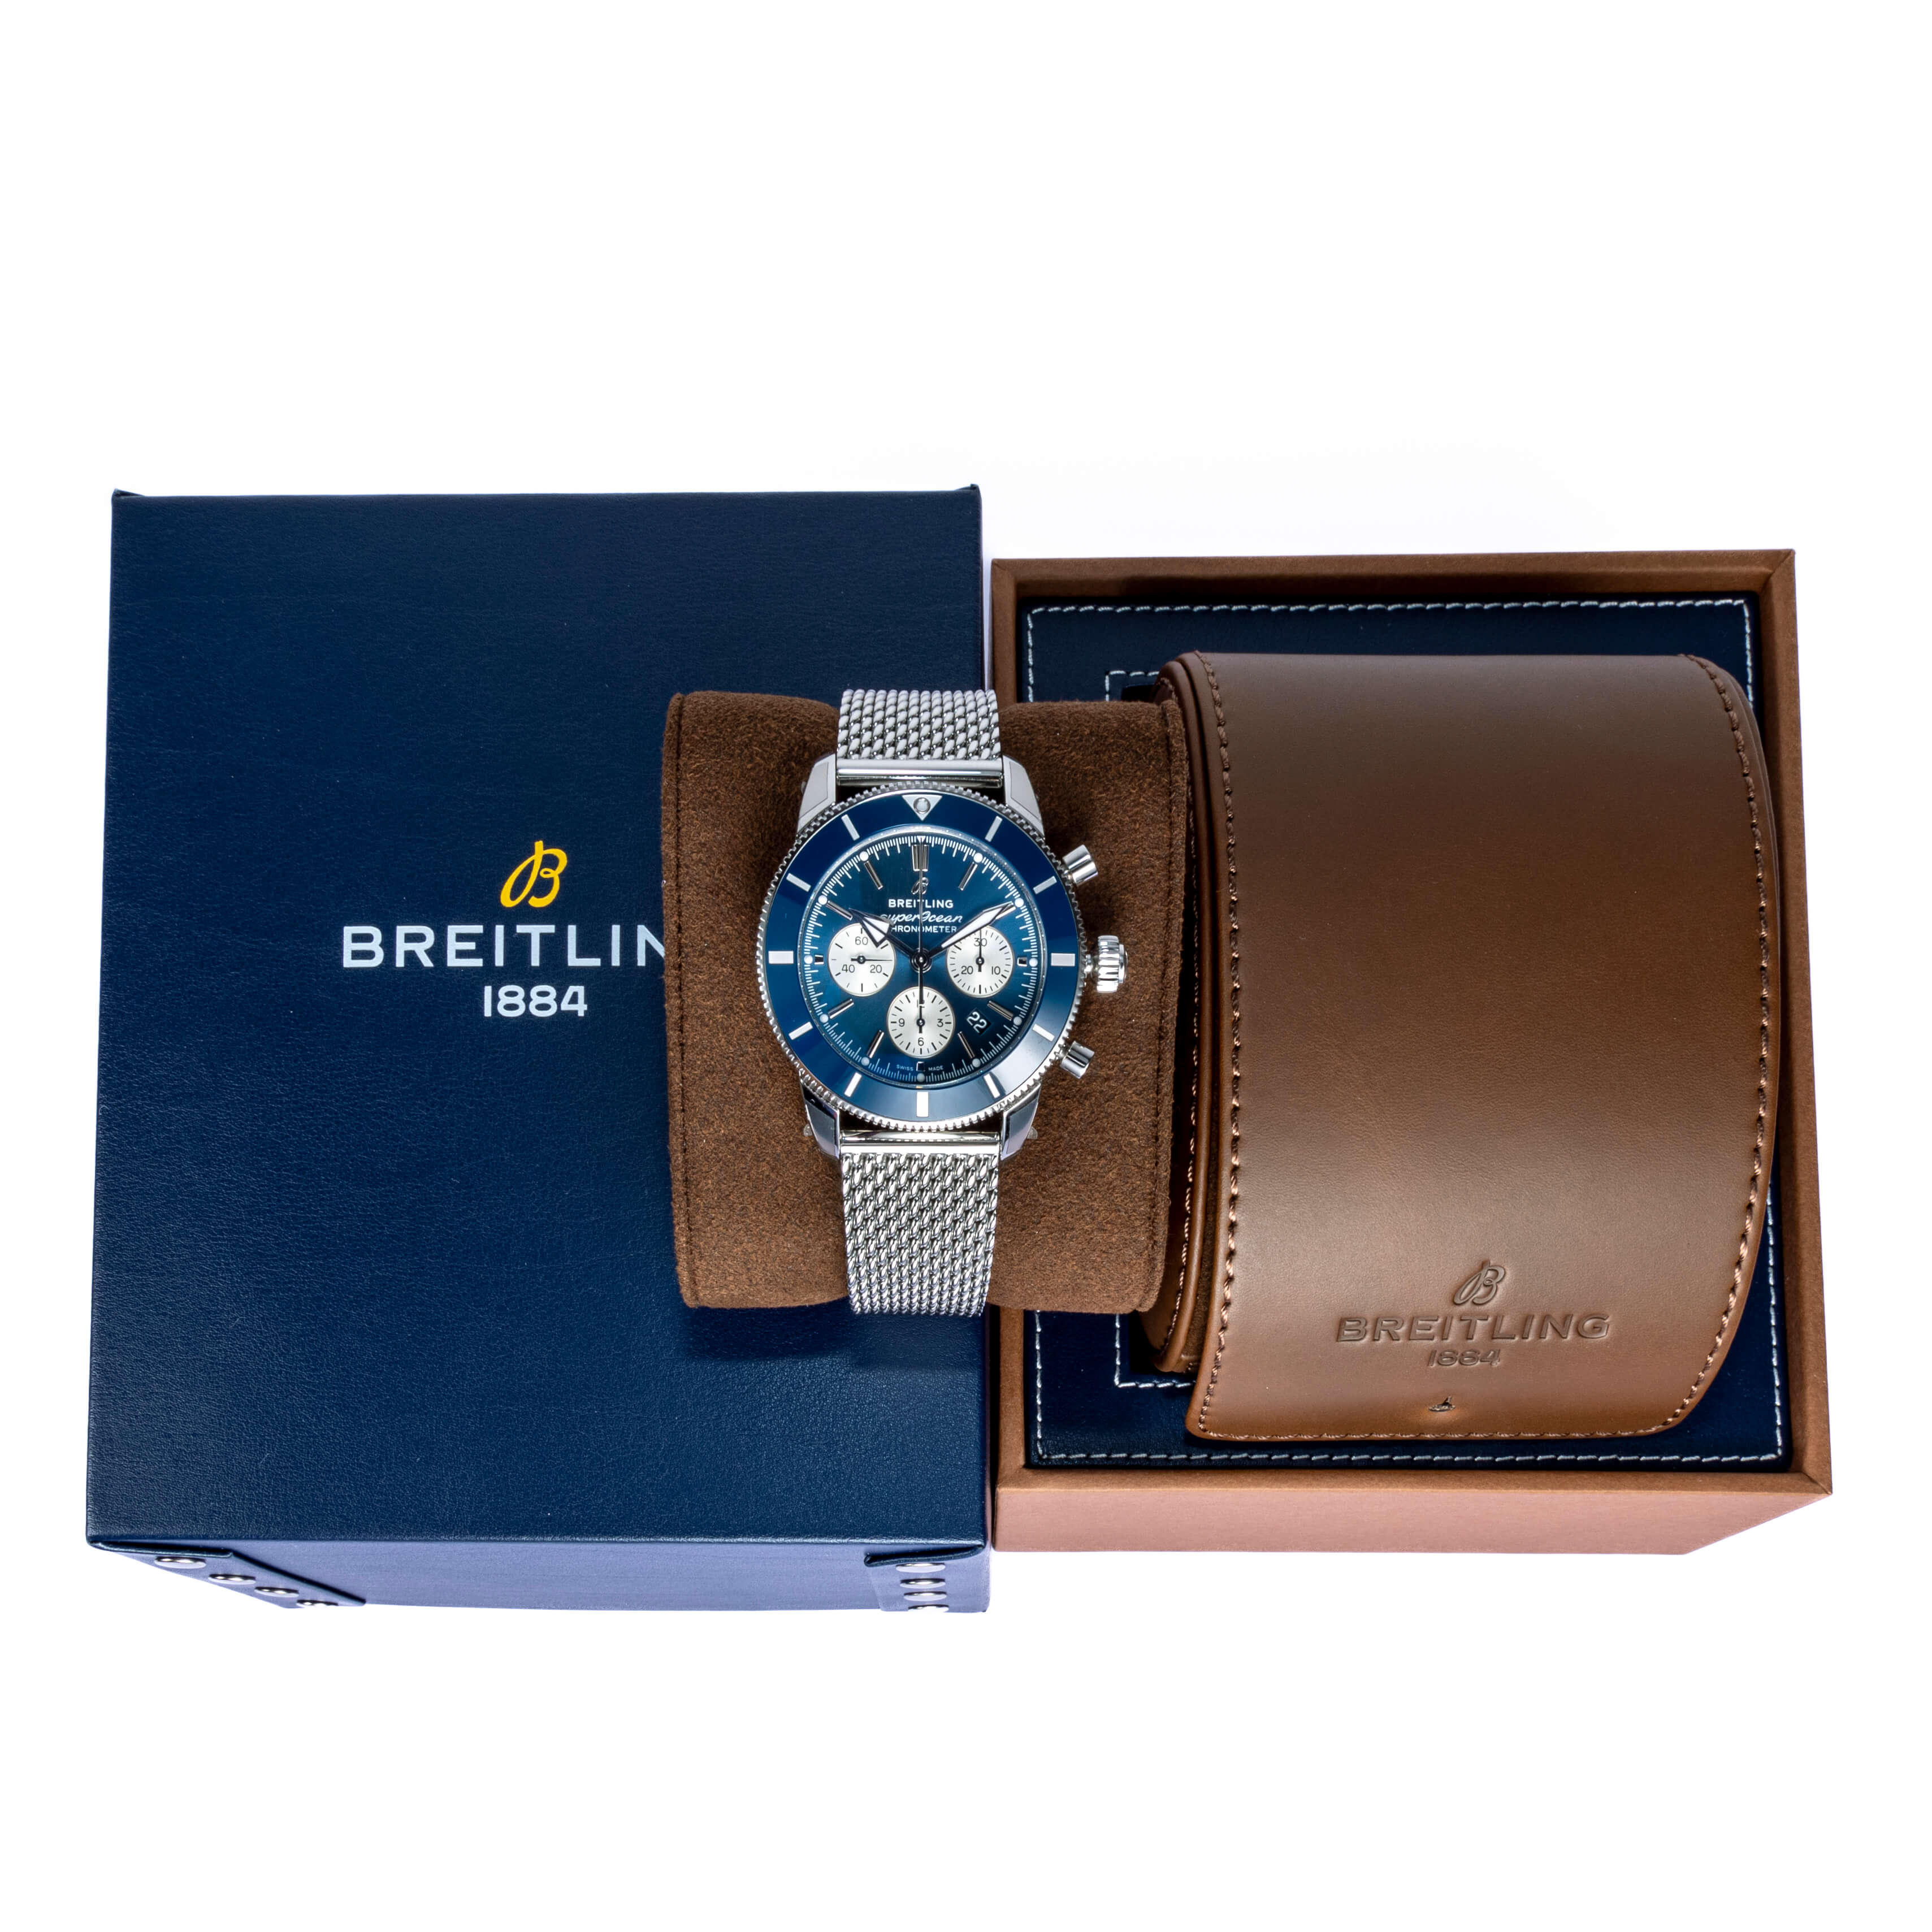 Stainless Steel Breitling Superocean-Heritage Blue Dial Wrapped Around a Watch Cushion Beside a Brown and Blue Breitling Box